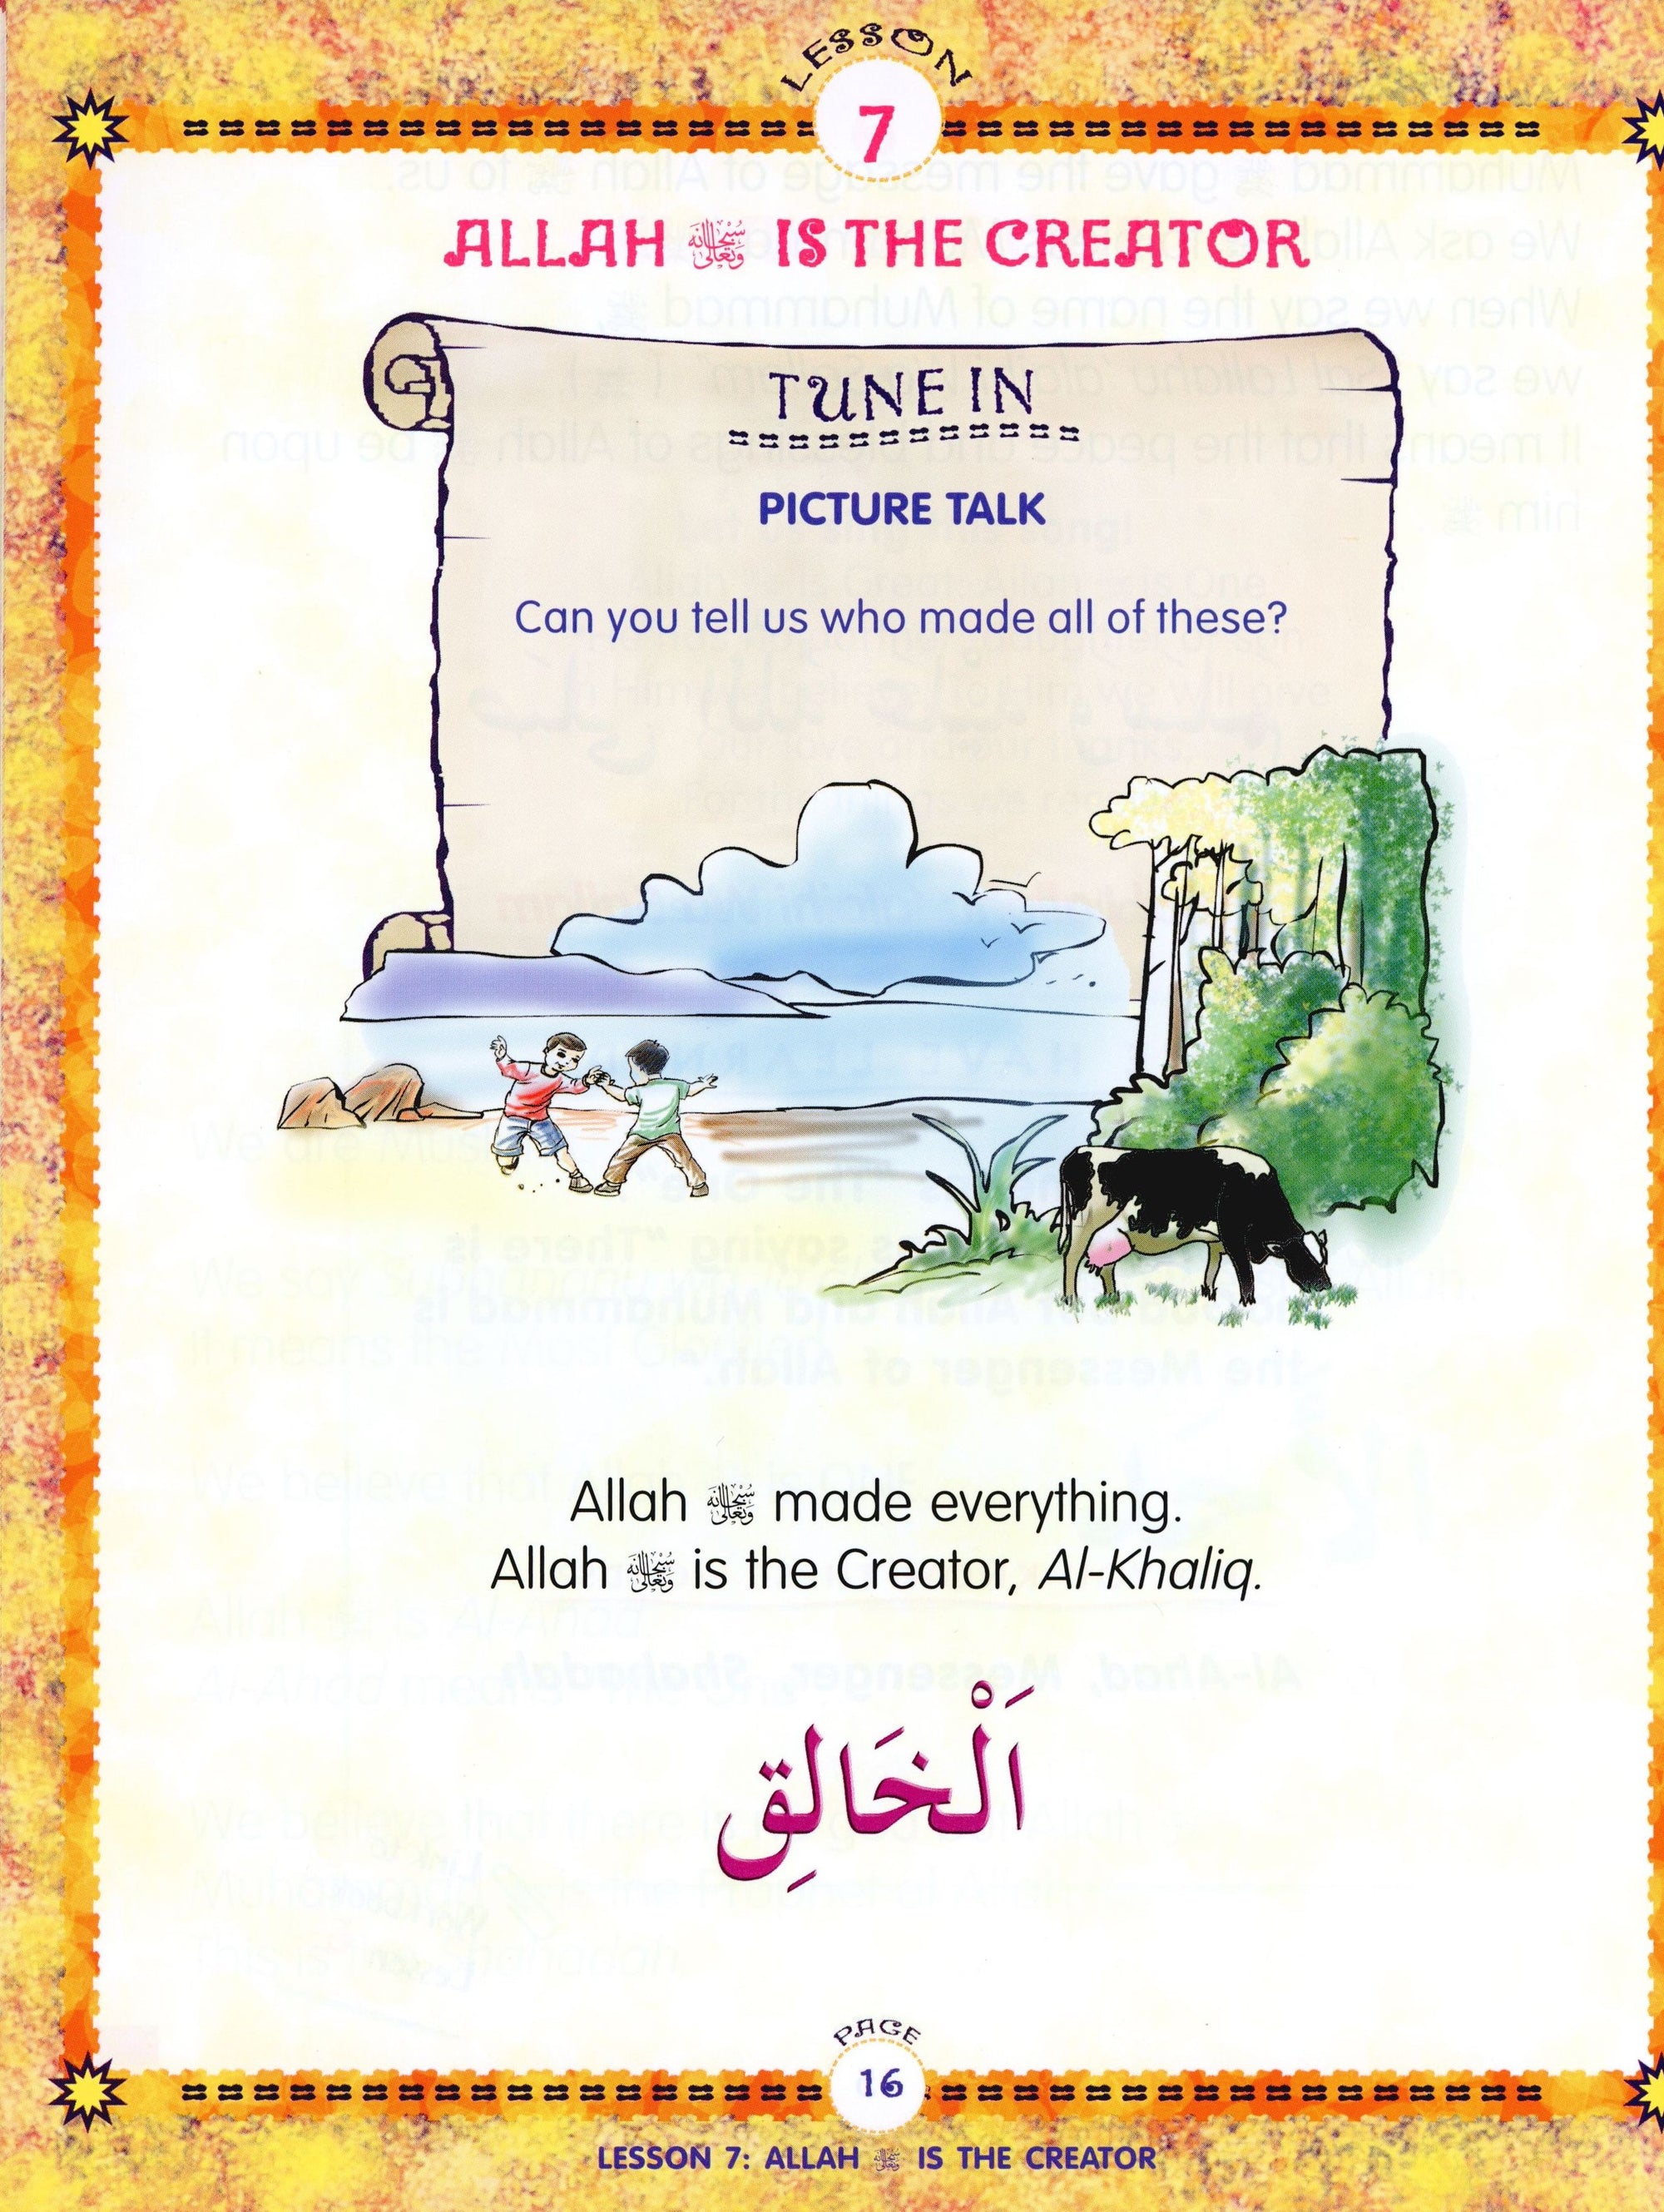 We Are Muslims Textbook Grade 1